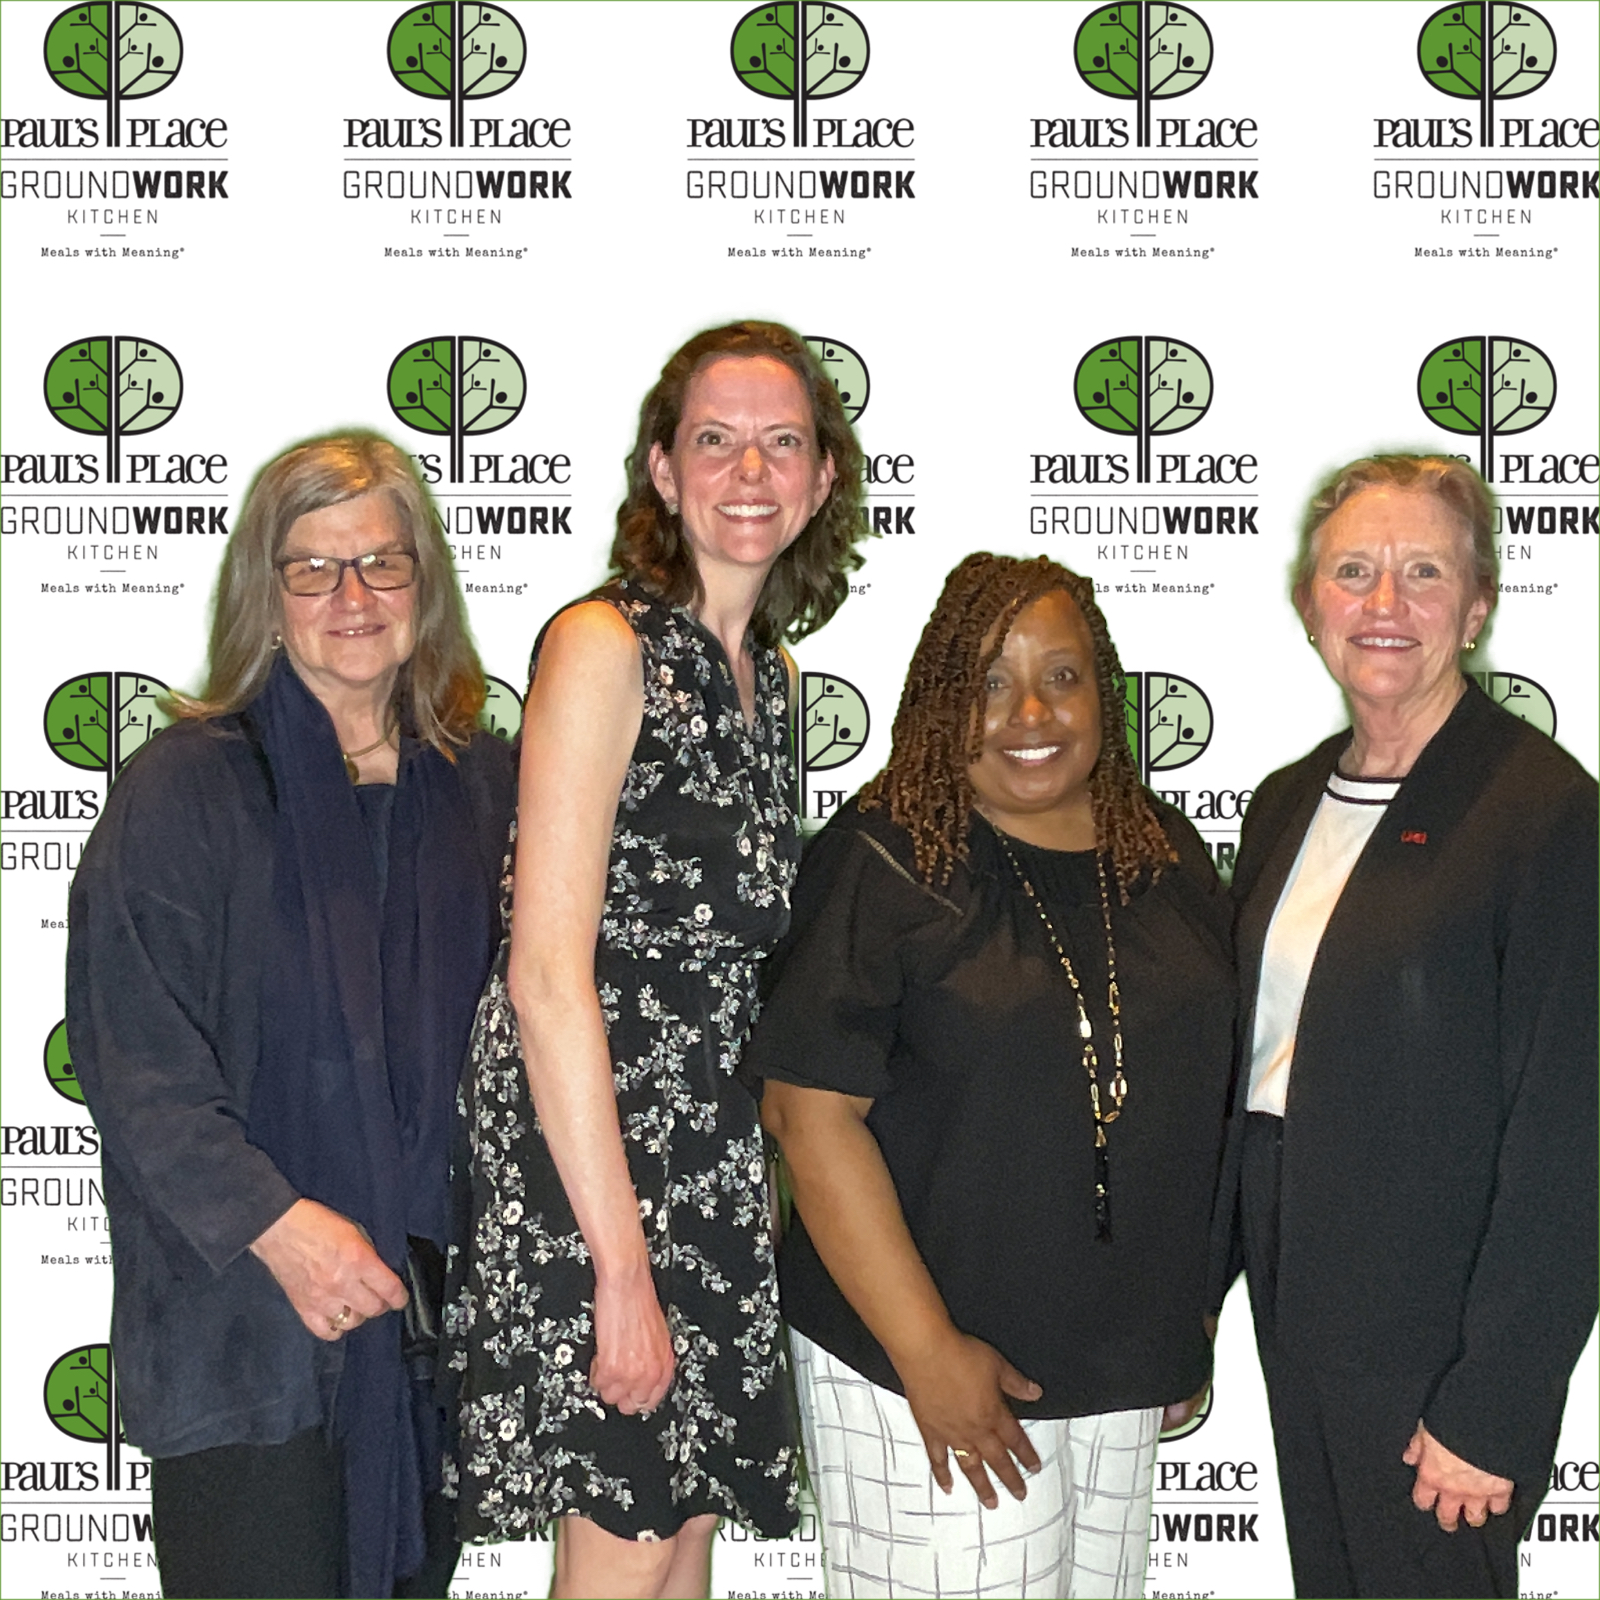 pictured, l. to r.: Susan Wozenski, JD, MPH; Megan Doede, PhD, RN; Michelle Spencer, DNP, RN; and Dean Kirschling at the Paul's Place 40th anniversary celebration